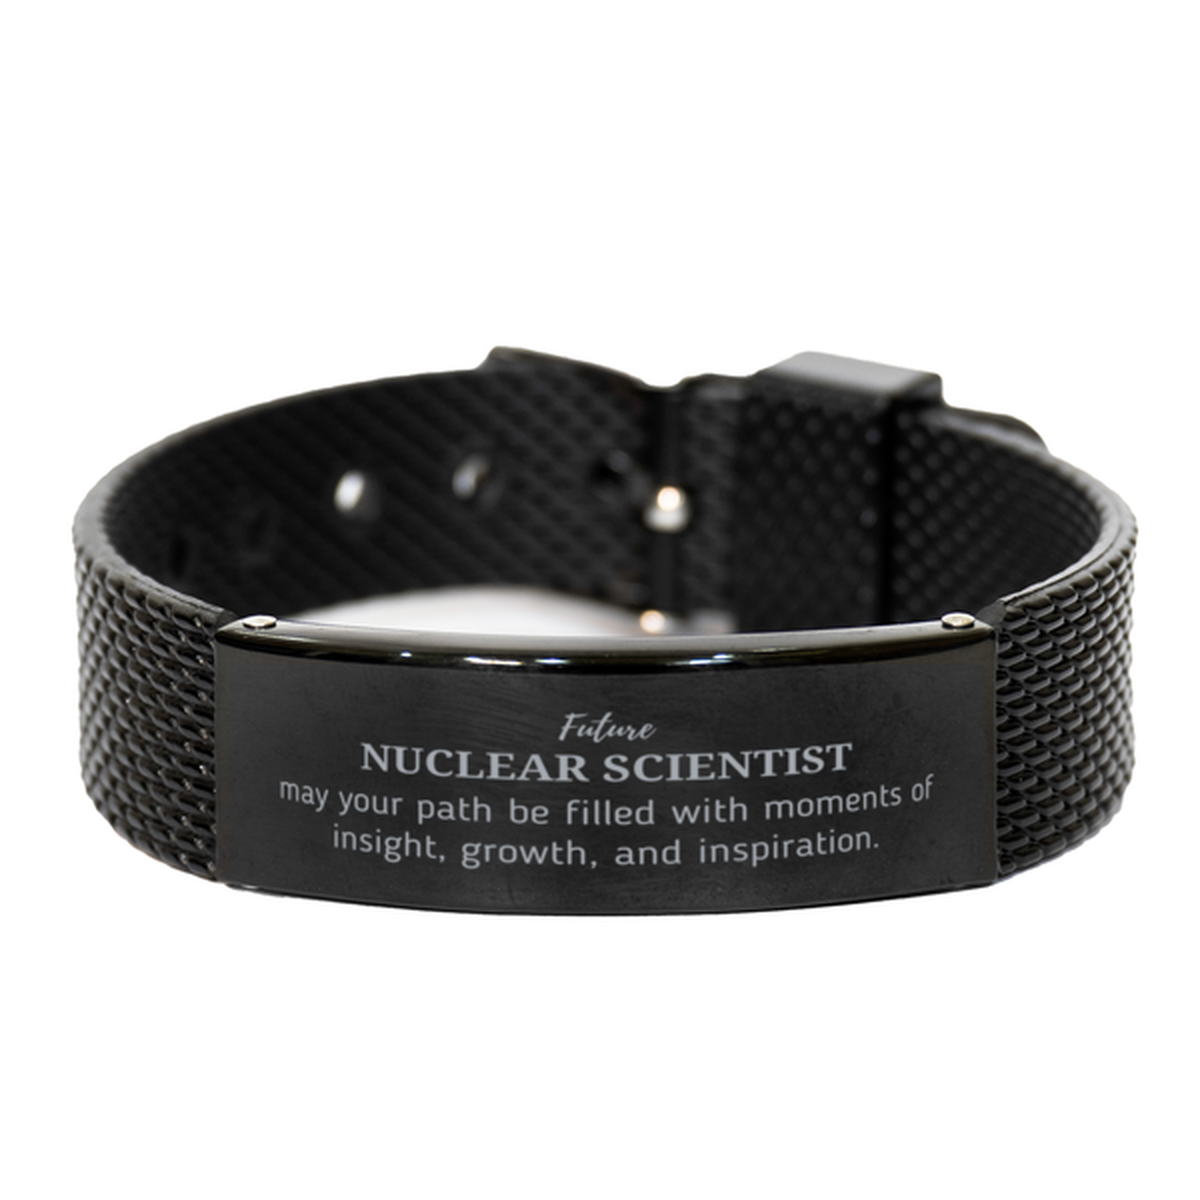 Future Nuclear Scientist Gifts, May your path be filled with moments of insight, Graduation Gifts for New Nuclear Scientist, Christmas Unique Black Shark Mesh Bracelet For Men, Women, Friends